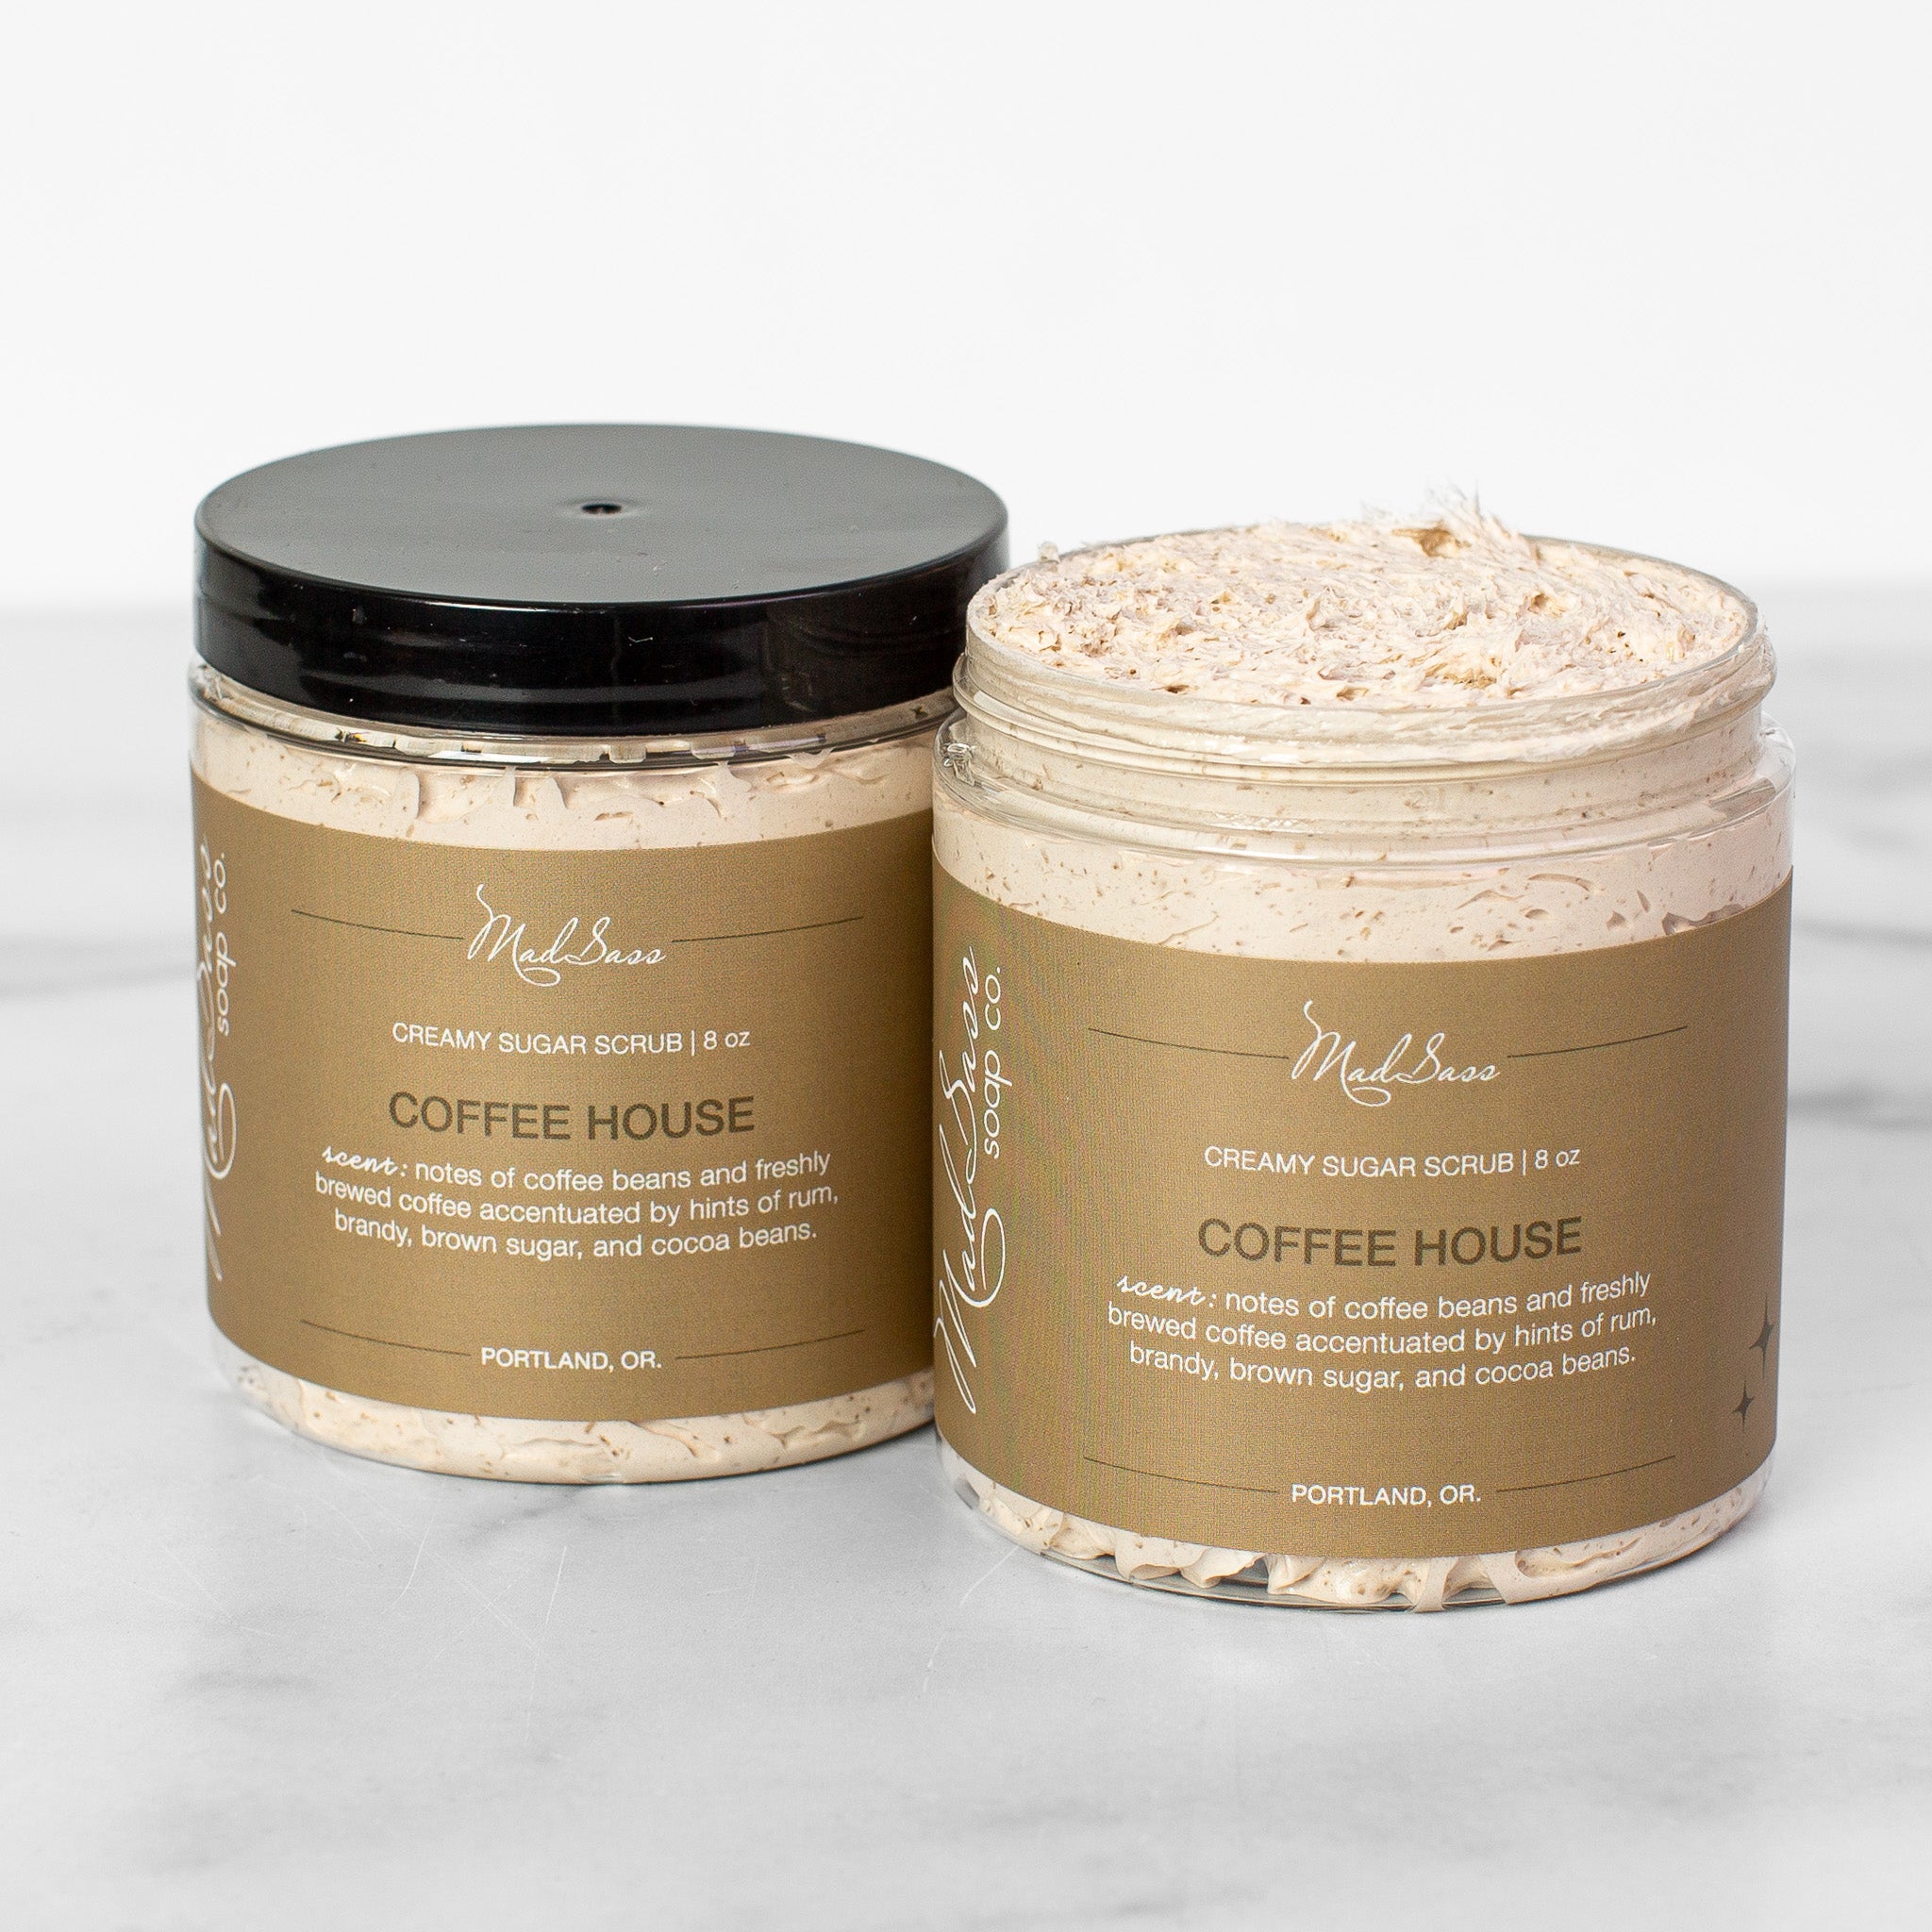 Two containers of Coffee House Sugar Scrubs on a white background. Coffee House is a light tan scrub in a clear tub with a black lid.